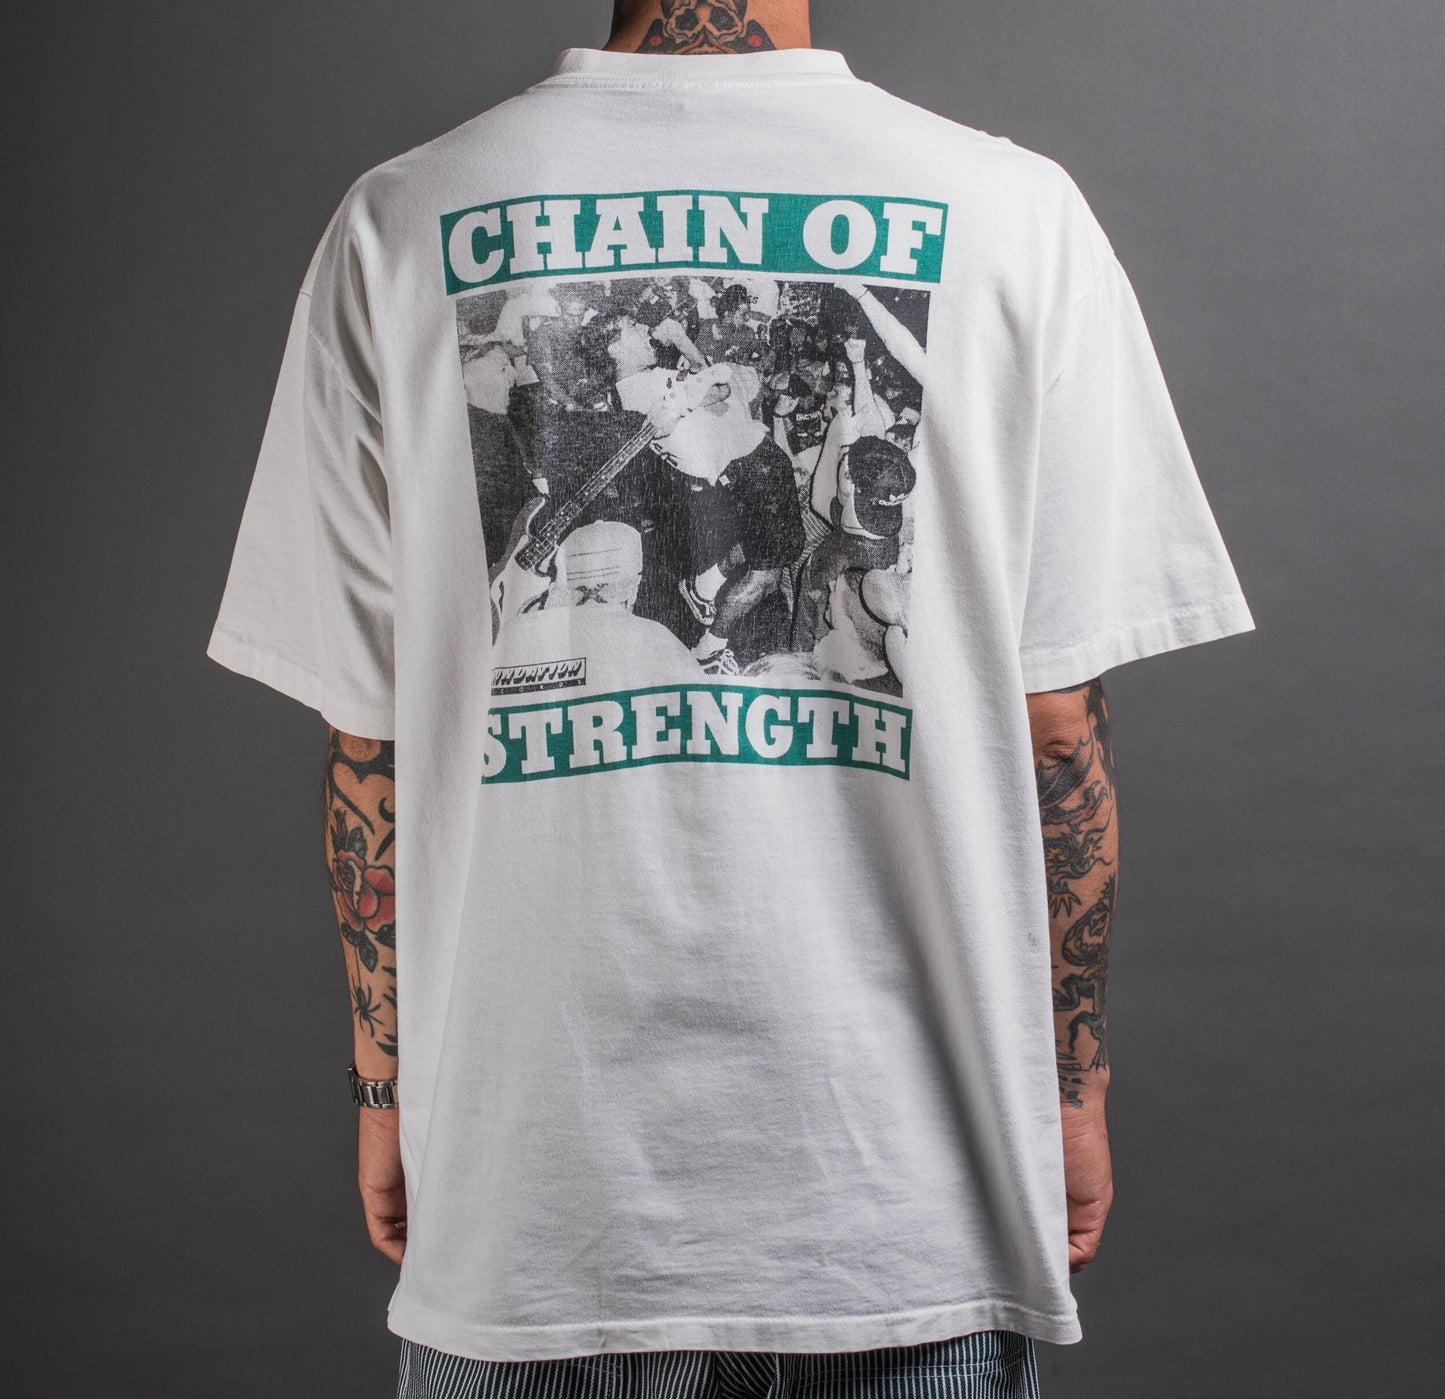 Vintage 90’s Chain Of Strength What Holds Us Apart T-Shirt